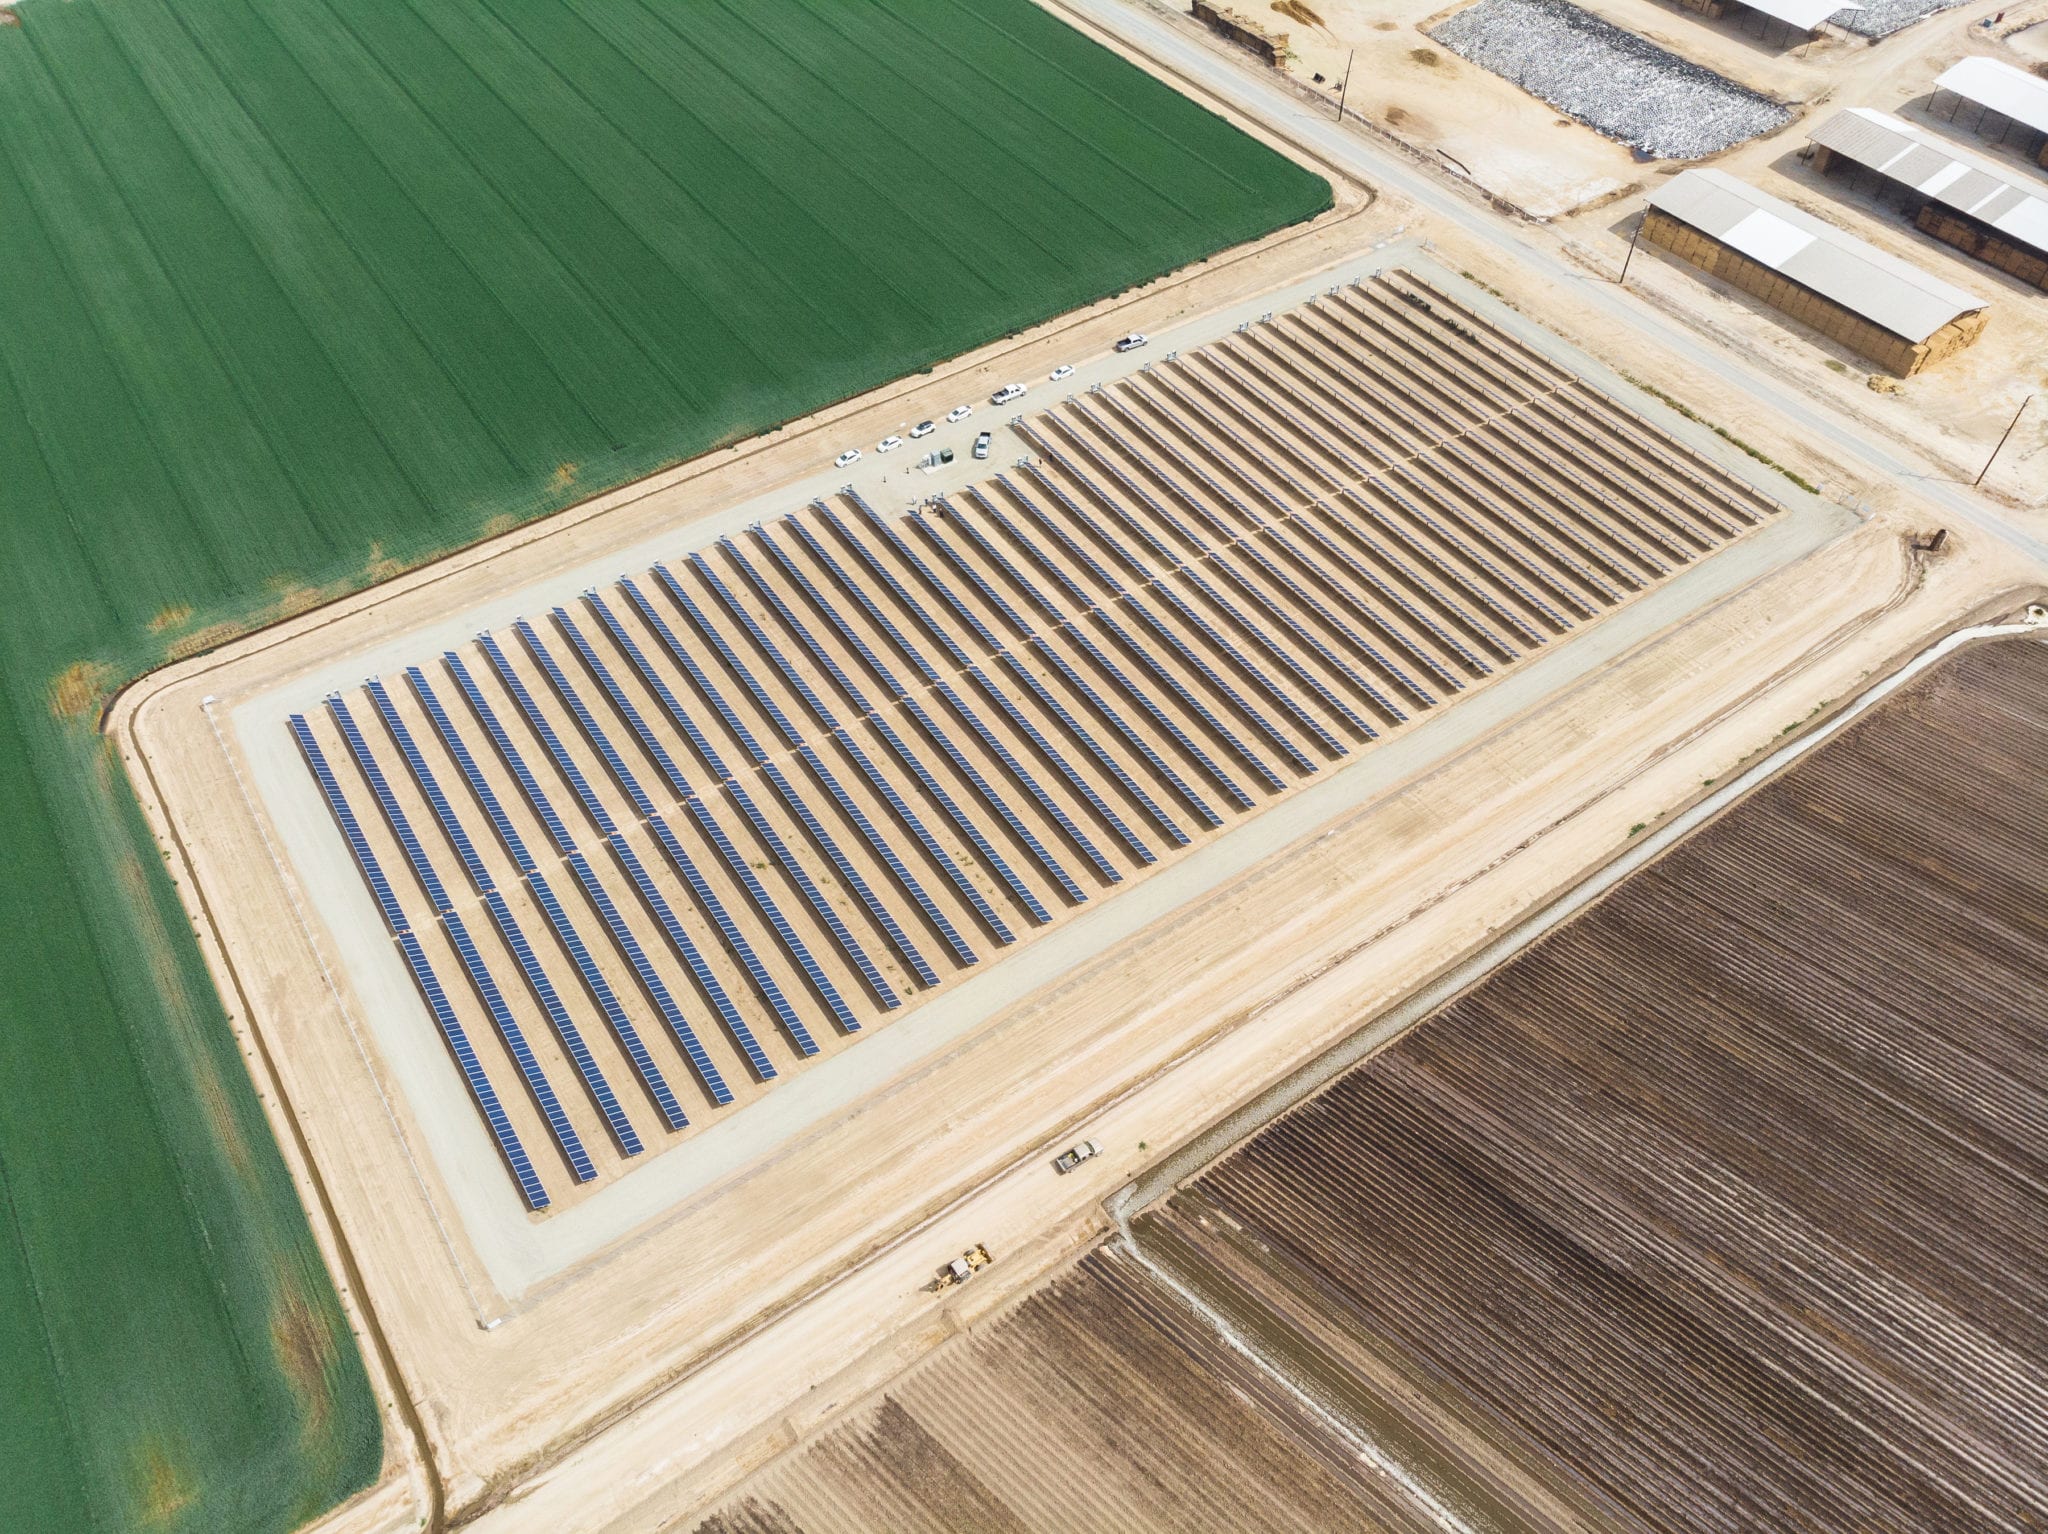 Aerial view of solar panels on a dairy farm surrounded by California agricultural land.